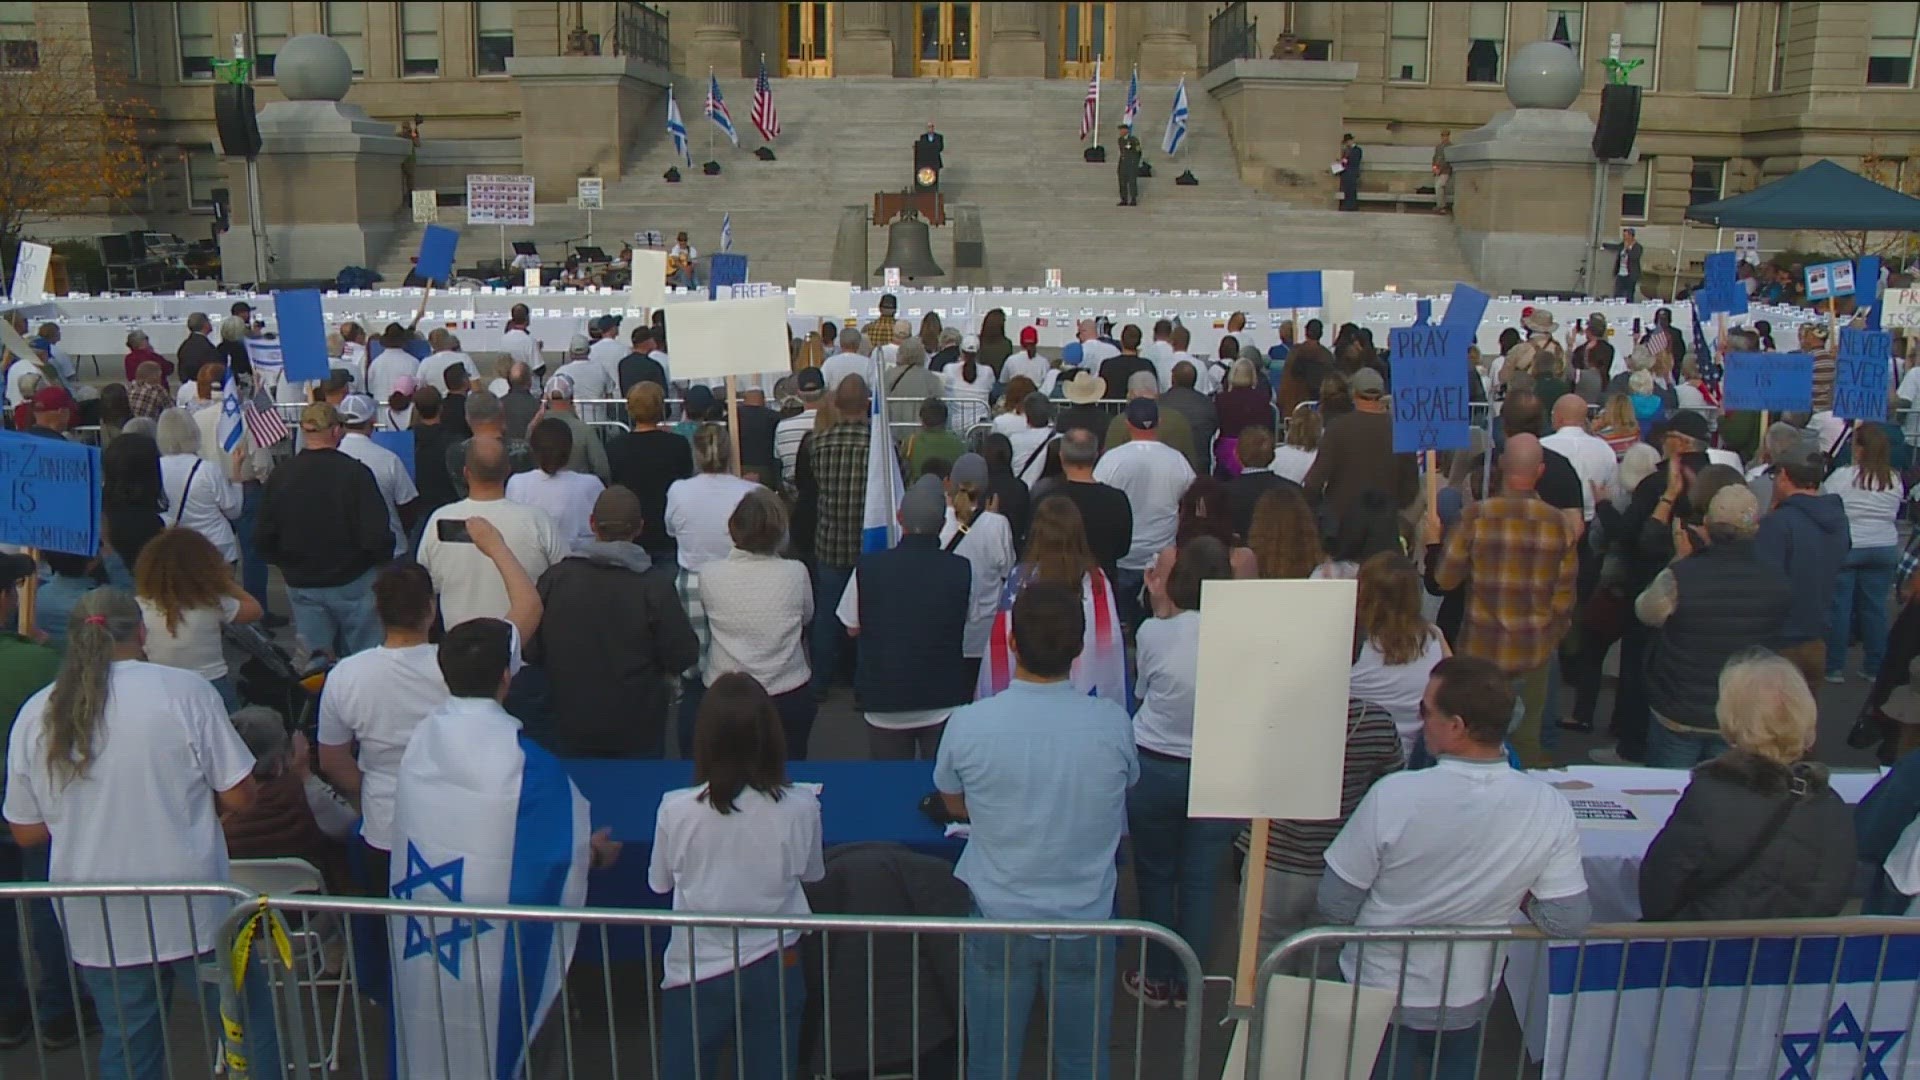 Roughly one thousand community members, faith leaders and politicians were at the state capitol.